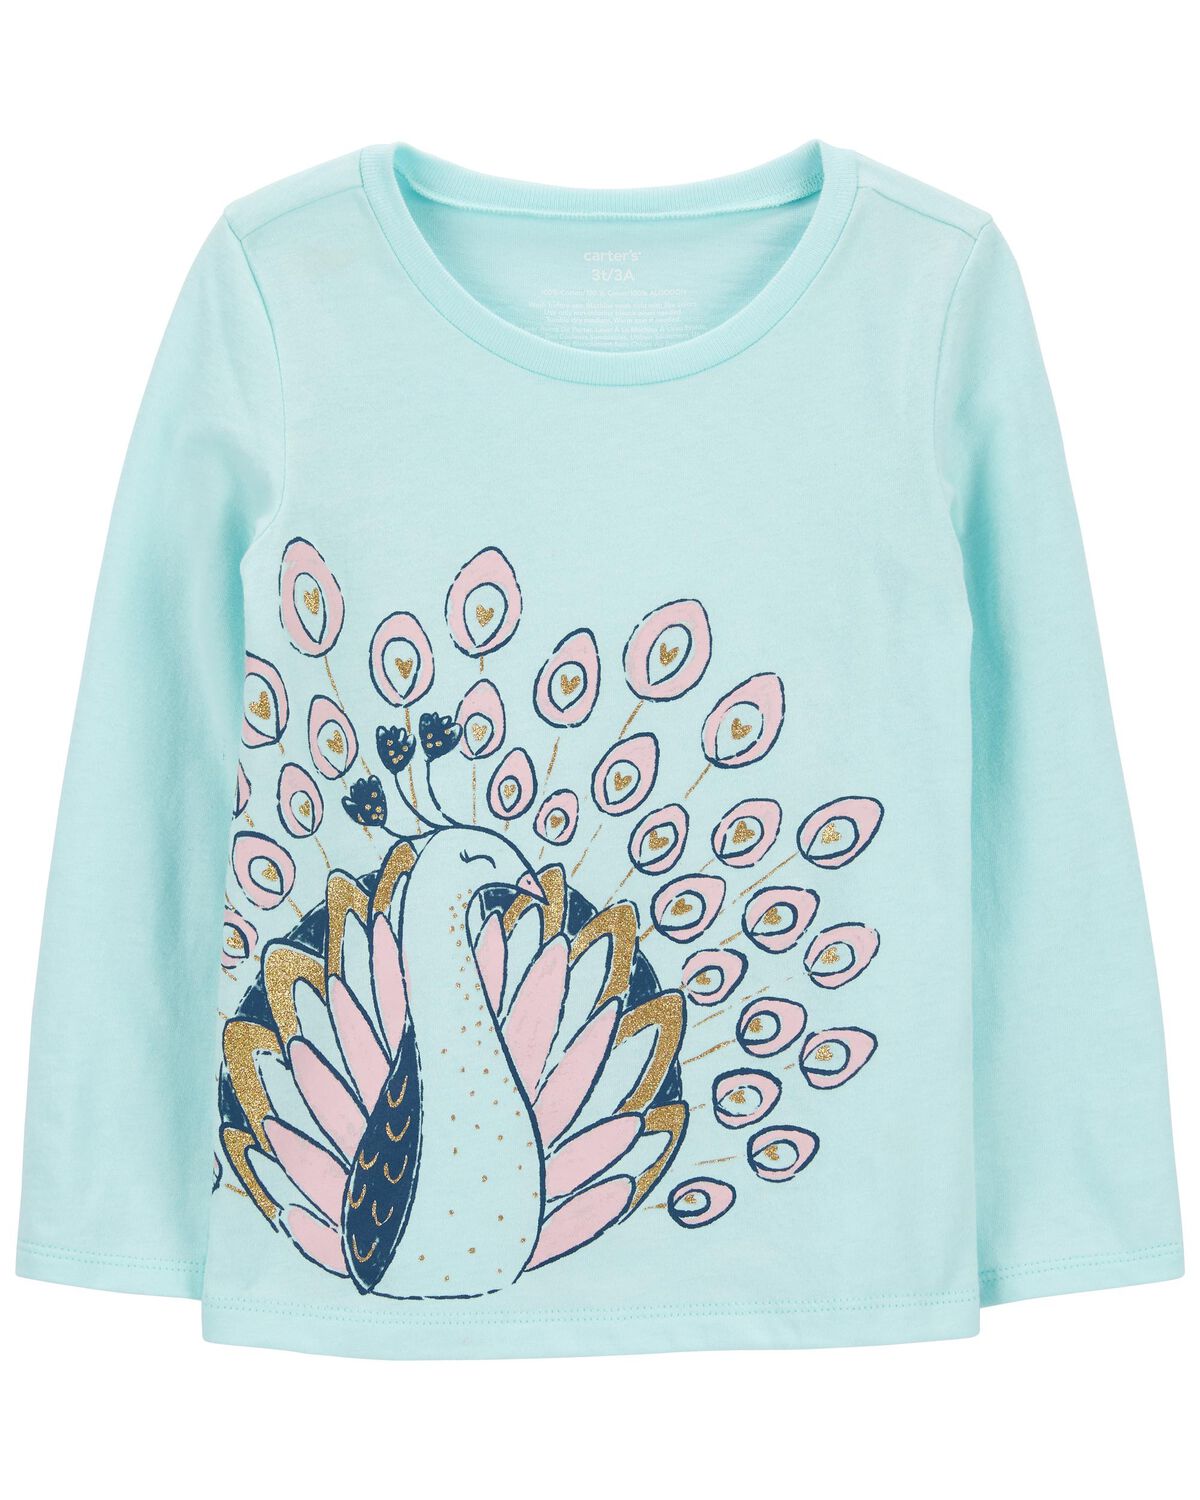 Blue Toddler Peacock Graphic Tee | carters.com